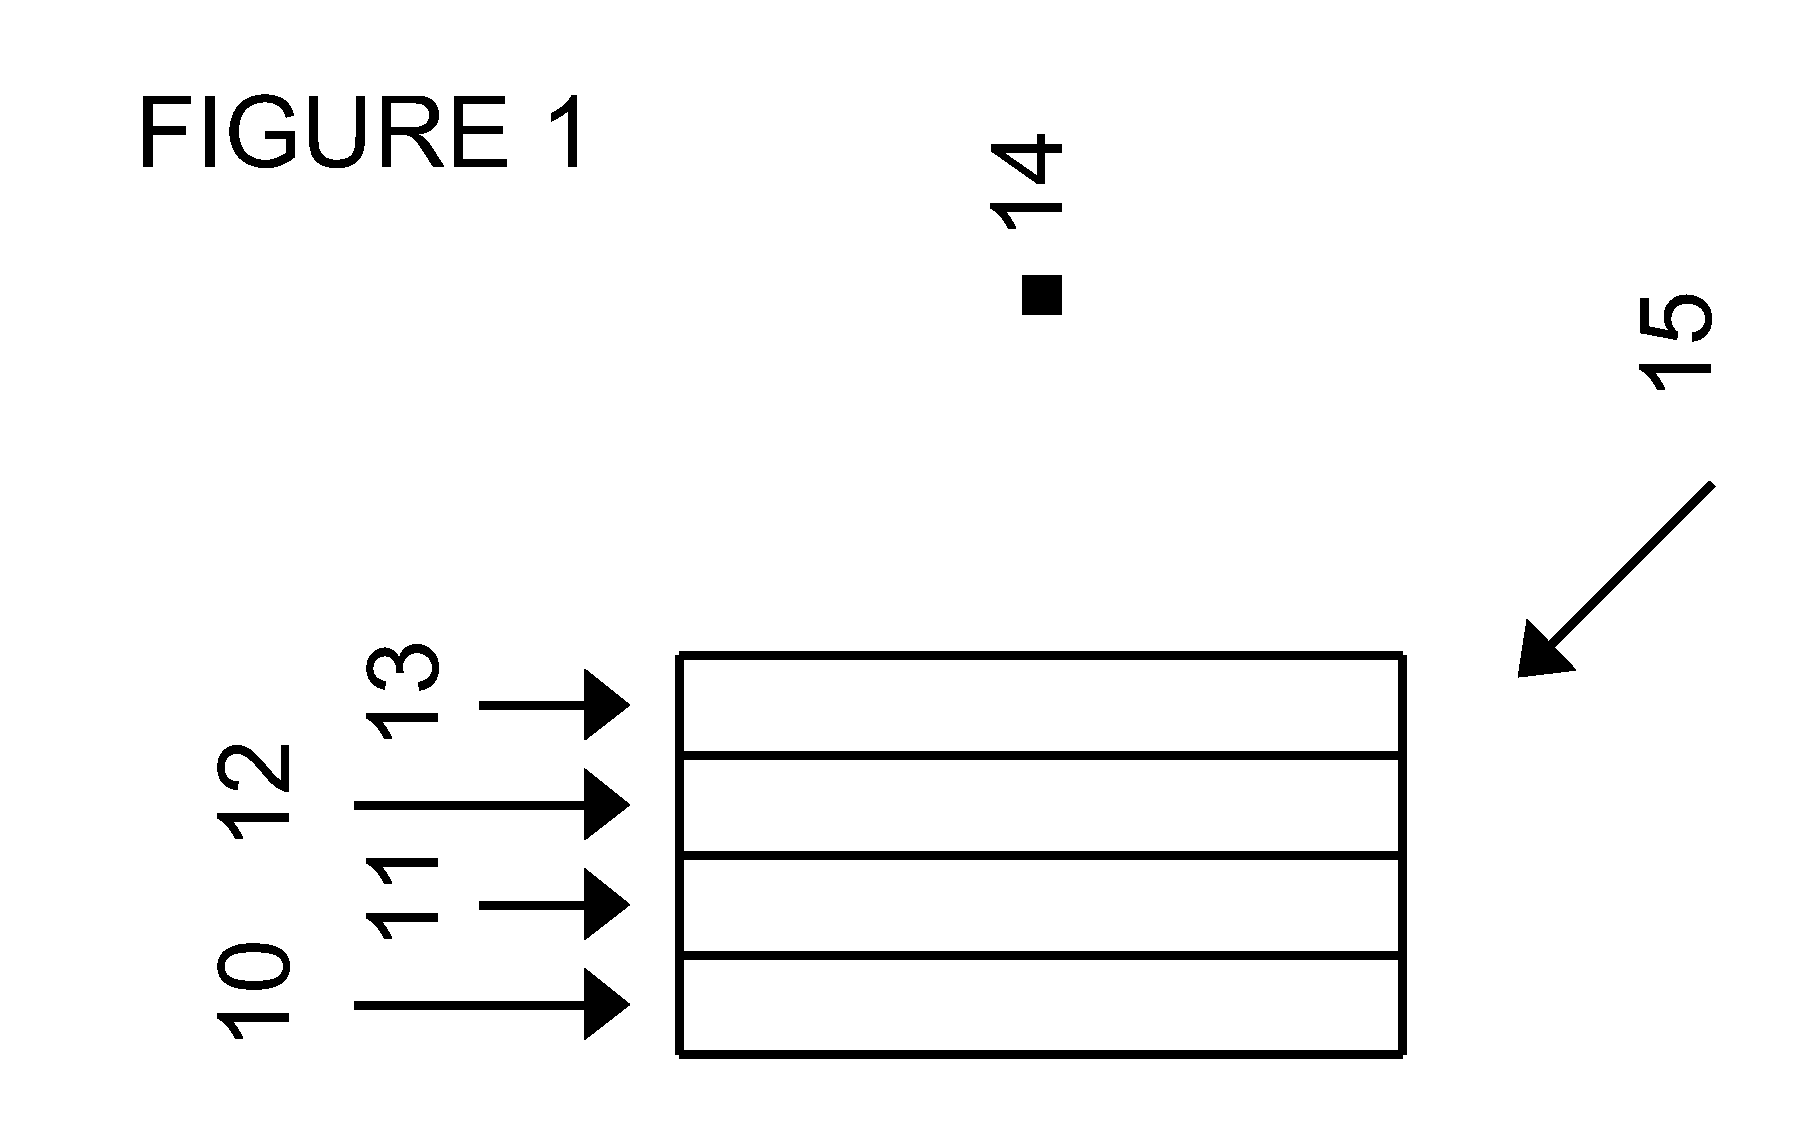 Mobile telephony system comprising holographic display